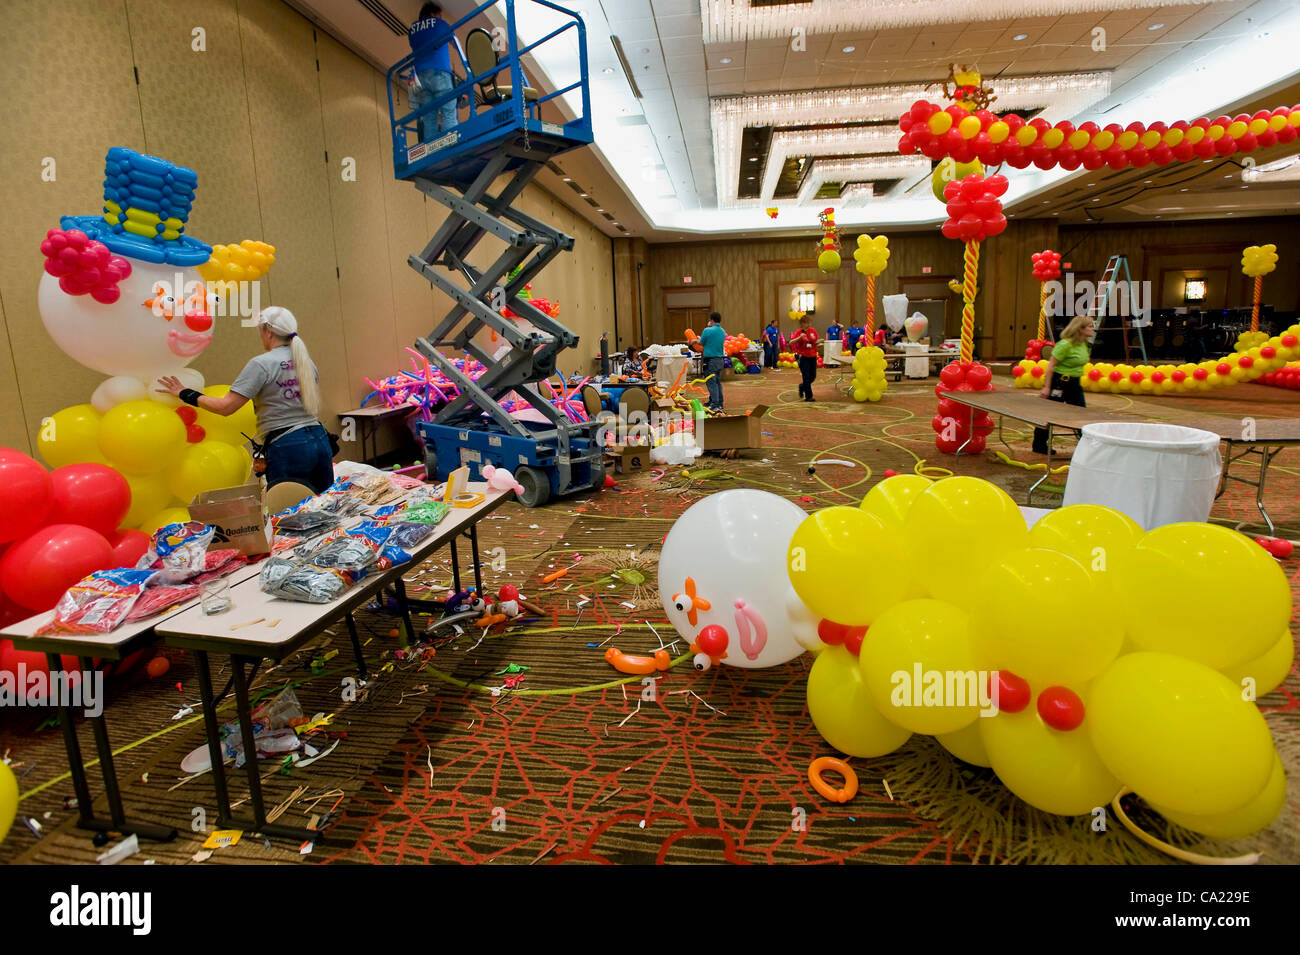 March 22, 2012 - Dallas, Texas, USA -  Decorations are readied for the evening's costume party during the biennial World Balloon Convention at the Sheraton Dallas Hotel.  Attended by approximately 700 balloon artistry delegates and competitors from 46 countries, the WBC features sculptire contests,  Stock Photo